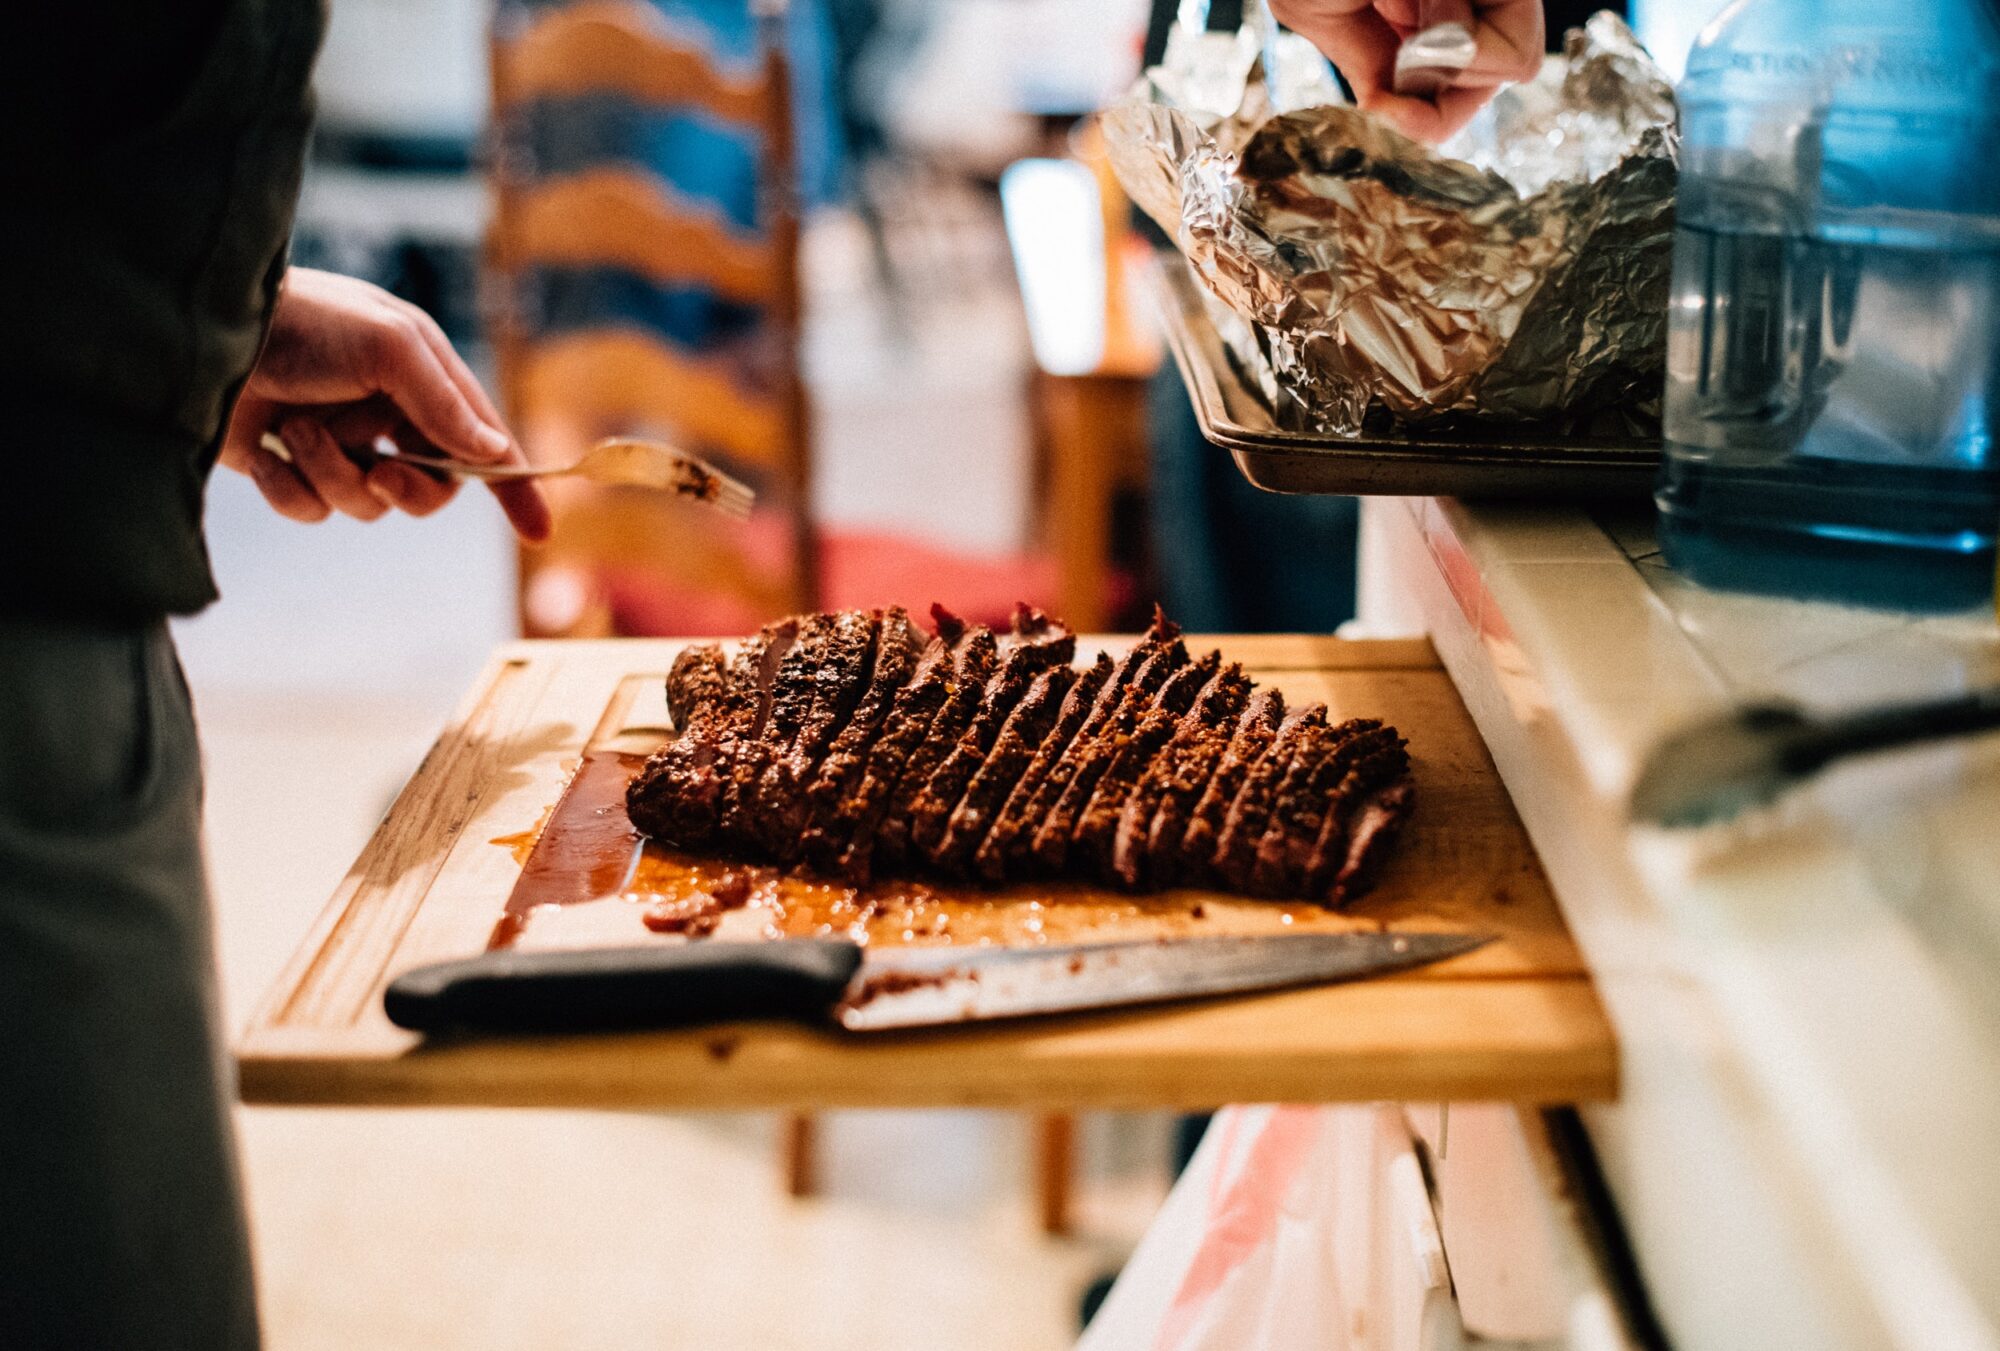 A person cutting up meat on top of a wooden board.